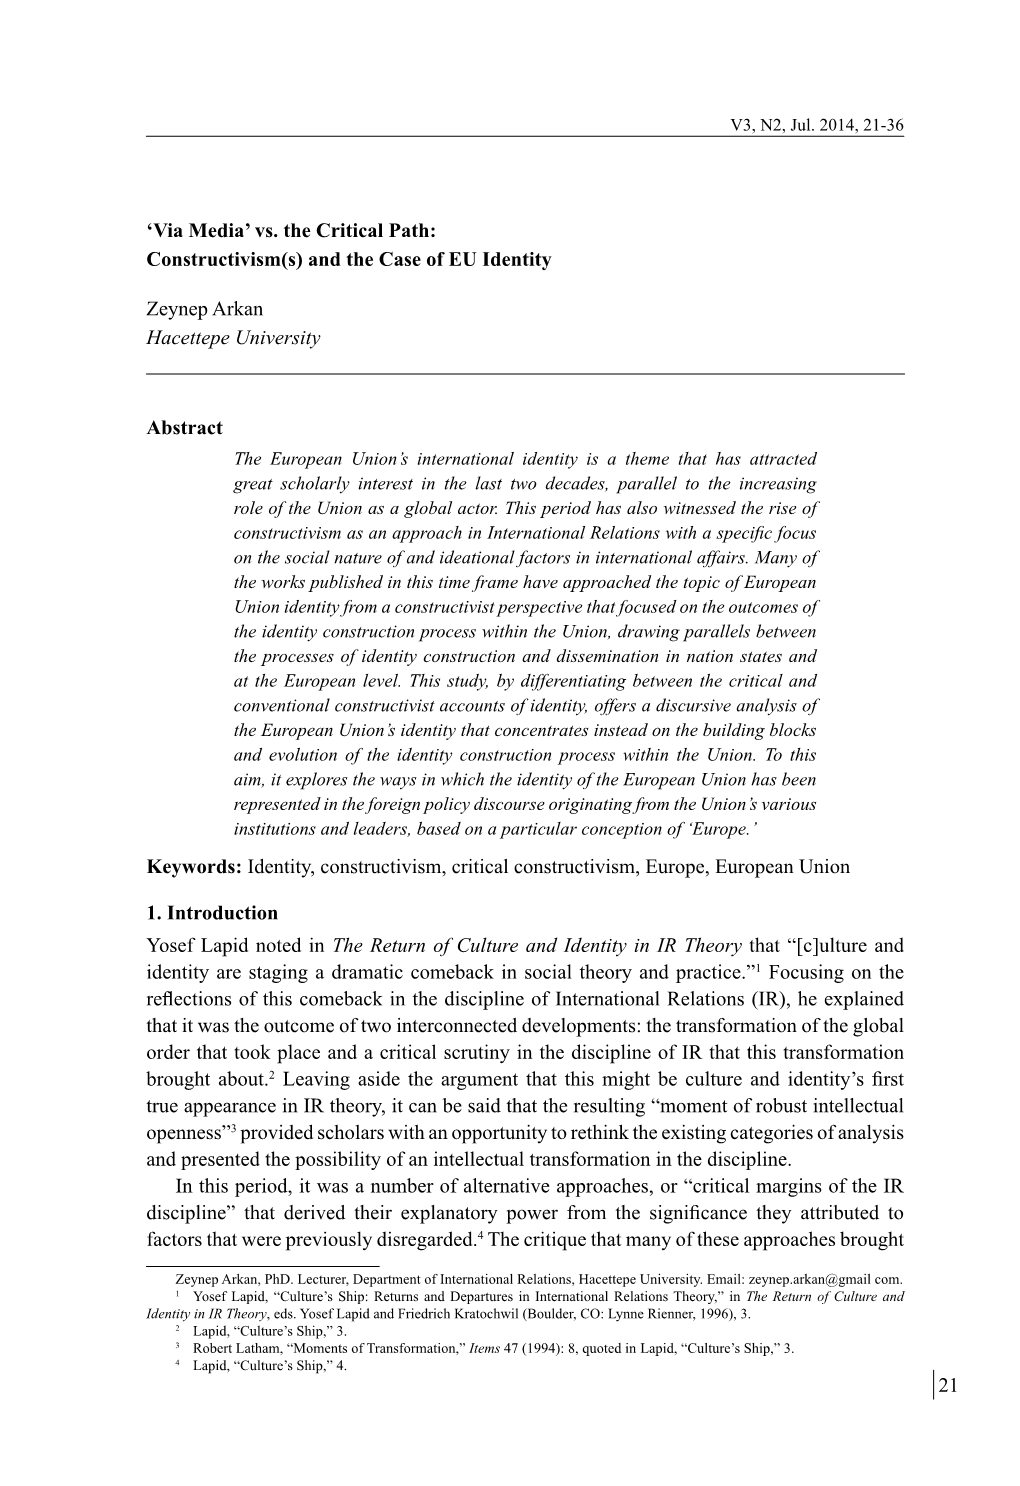 Vs. the Critical Path: Constructivism(S) and the Case of EU Identity Abstract